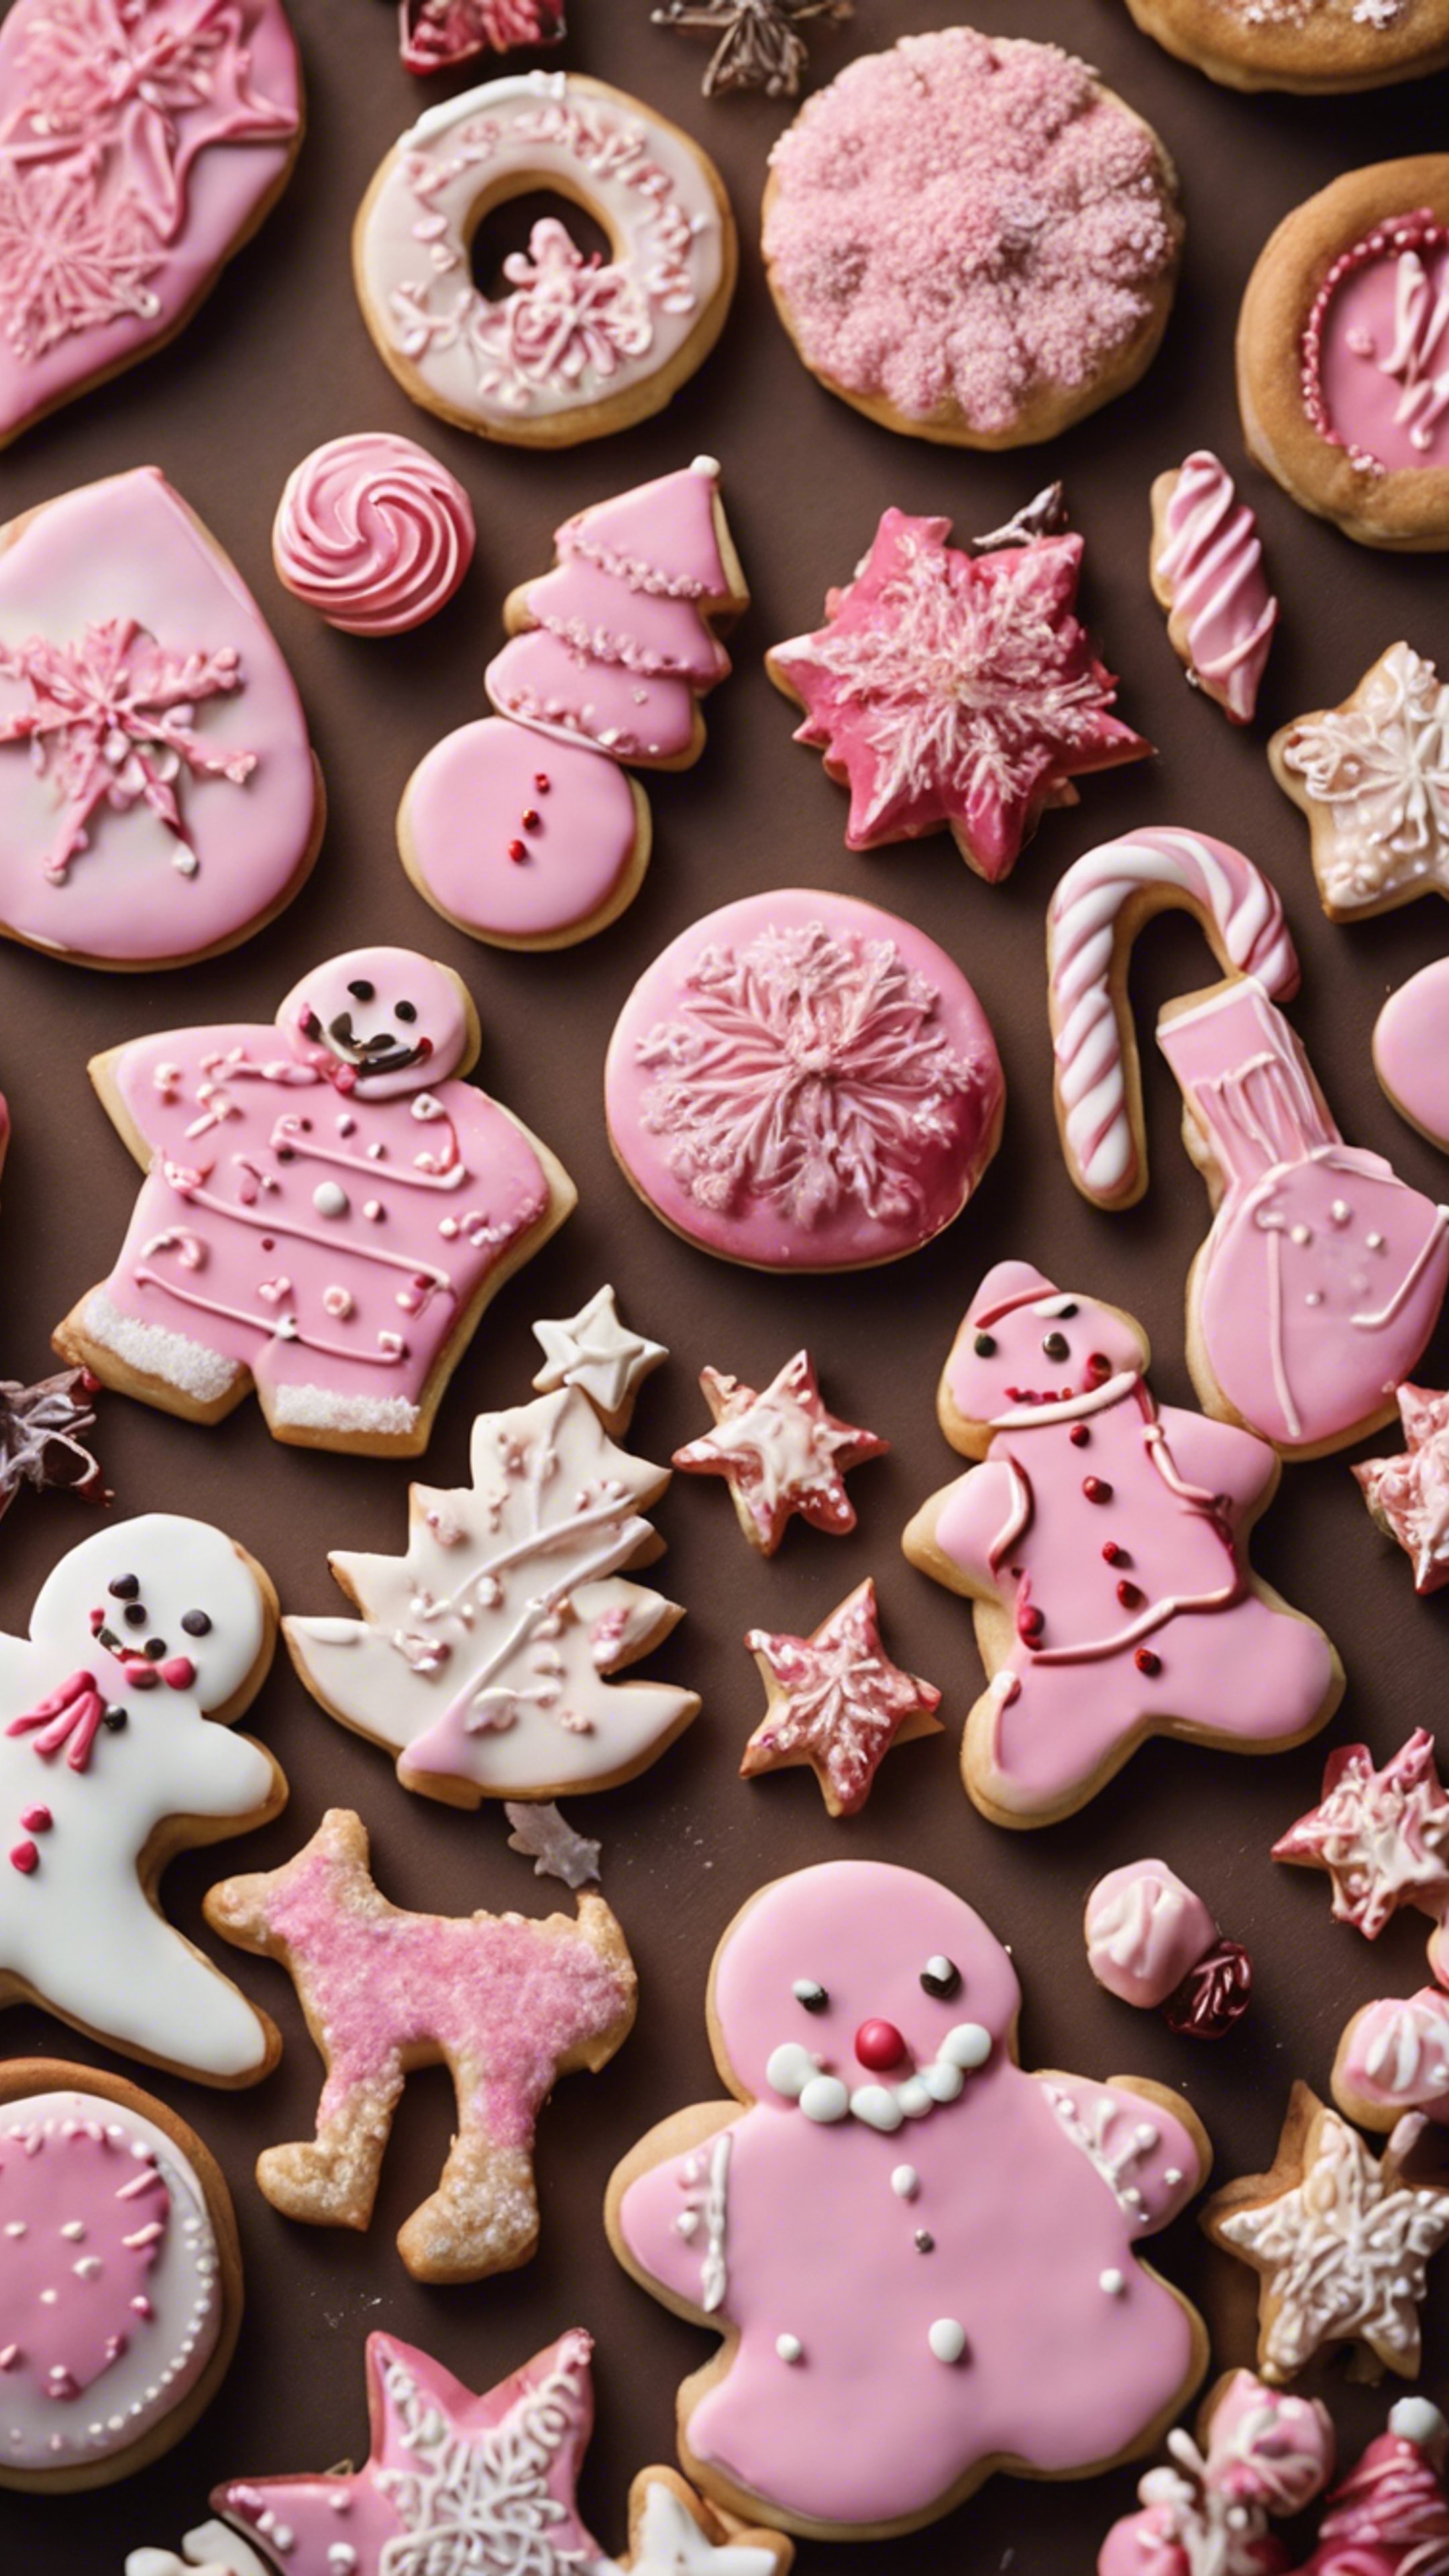 Various types of pink Christmas cookies and sweets laid on a table with festive decorations. Тапет[bb72647e6a9944a5b5aa]